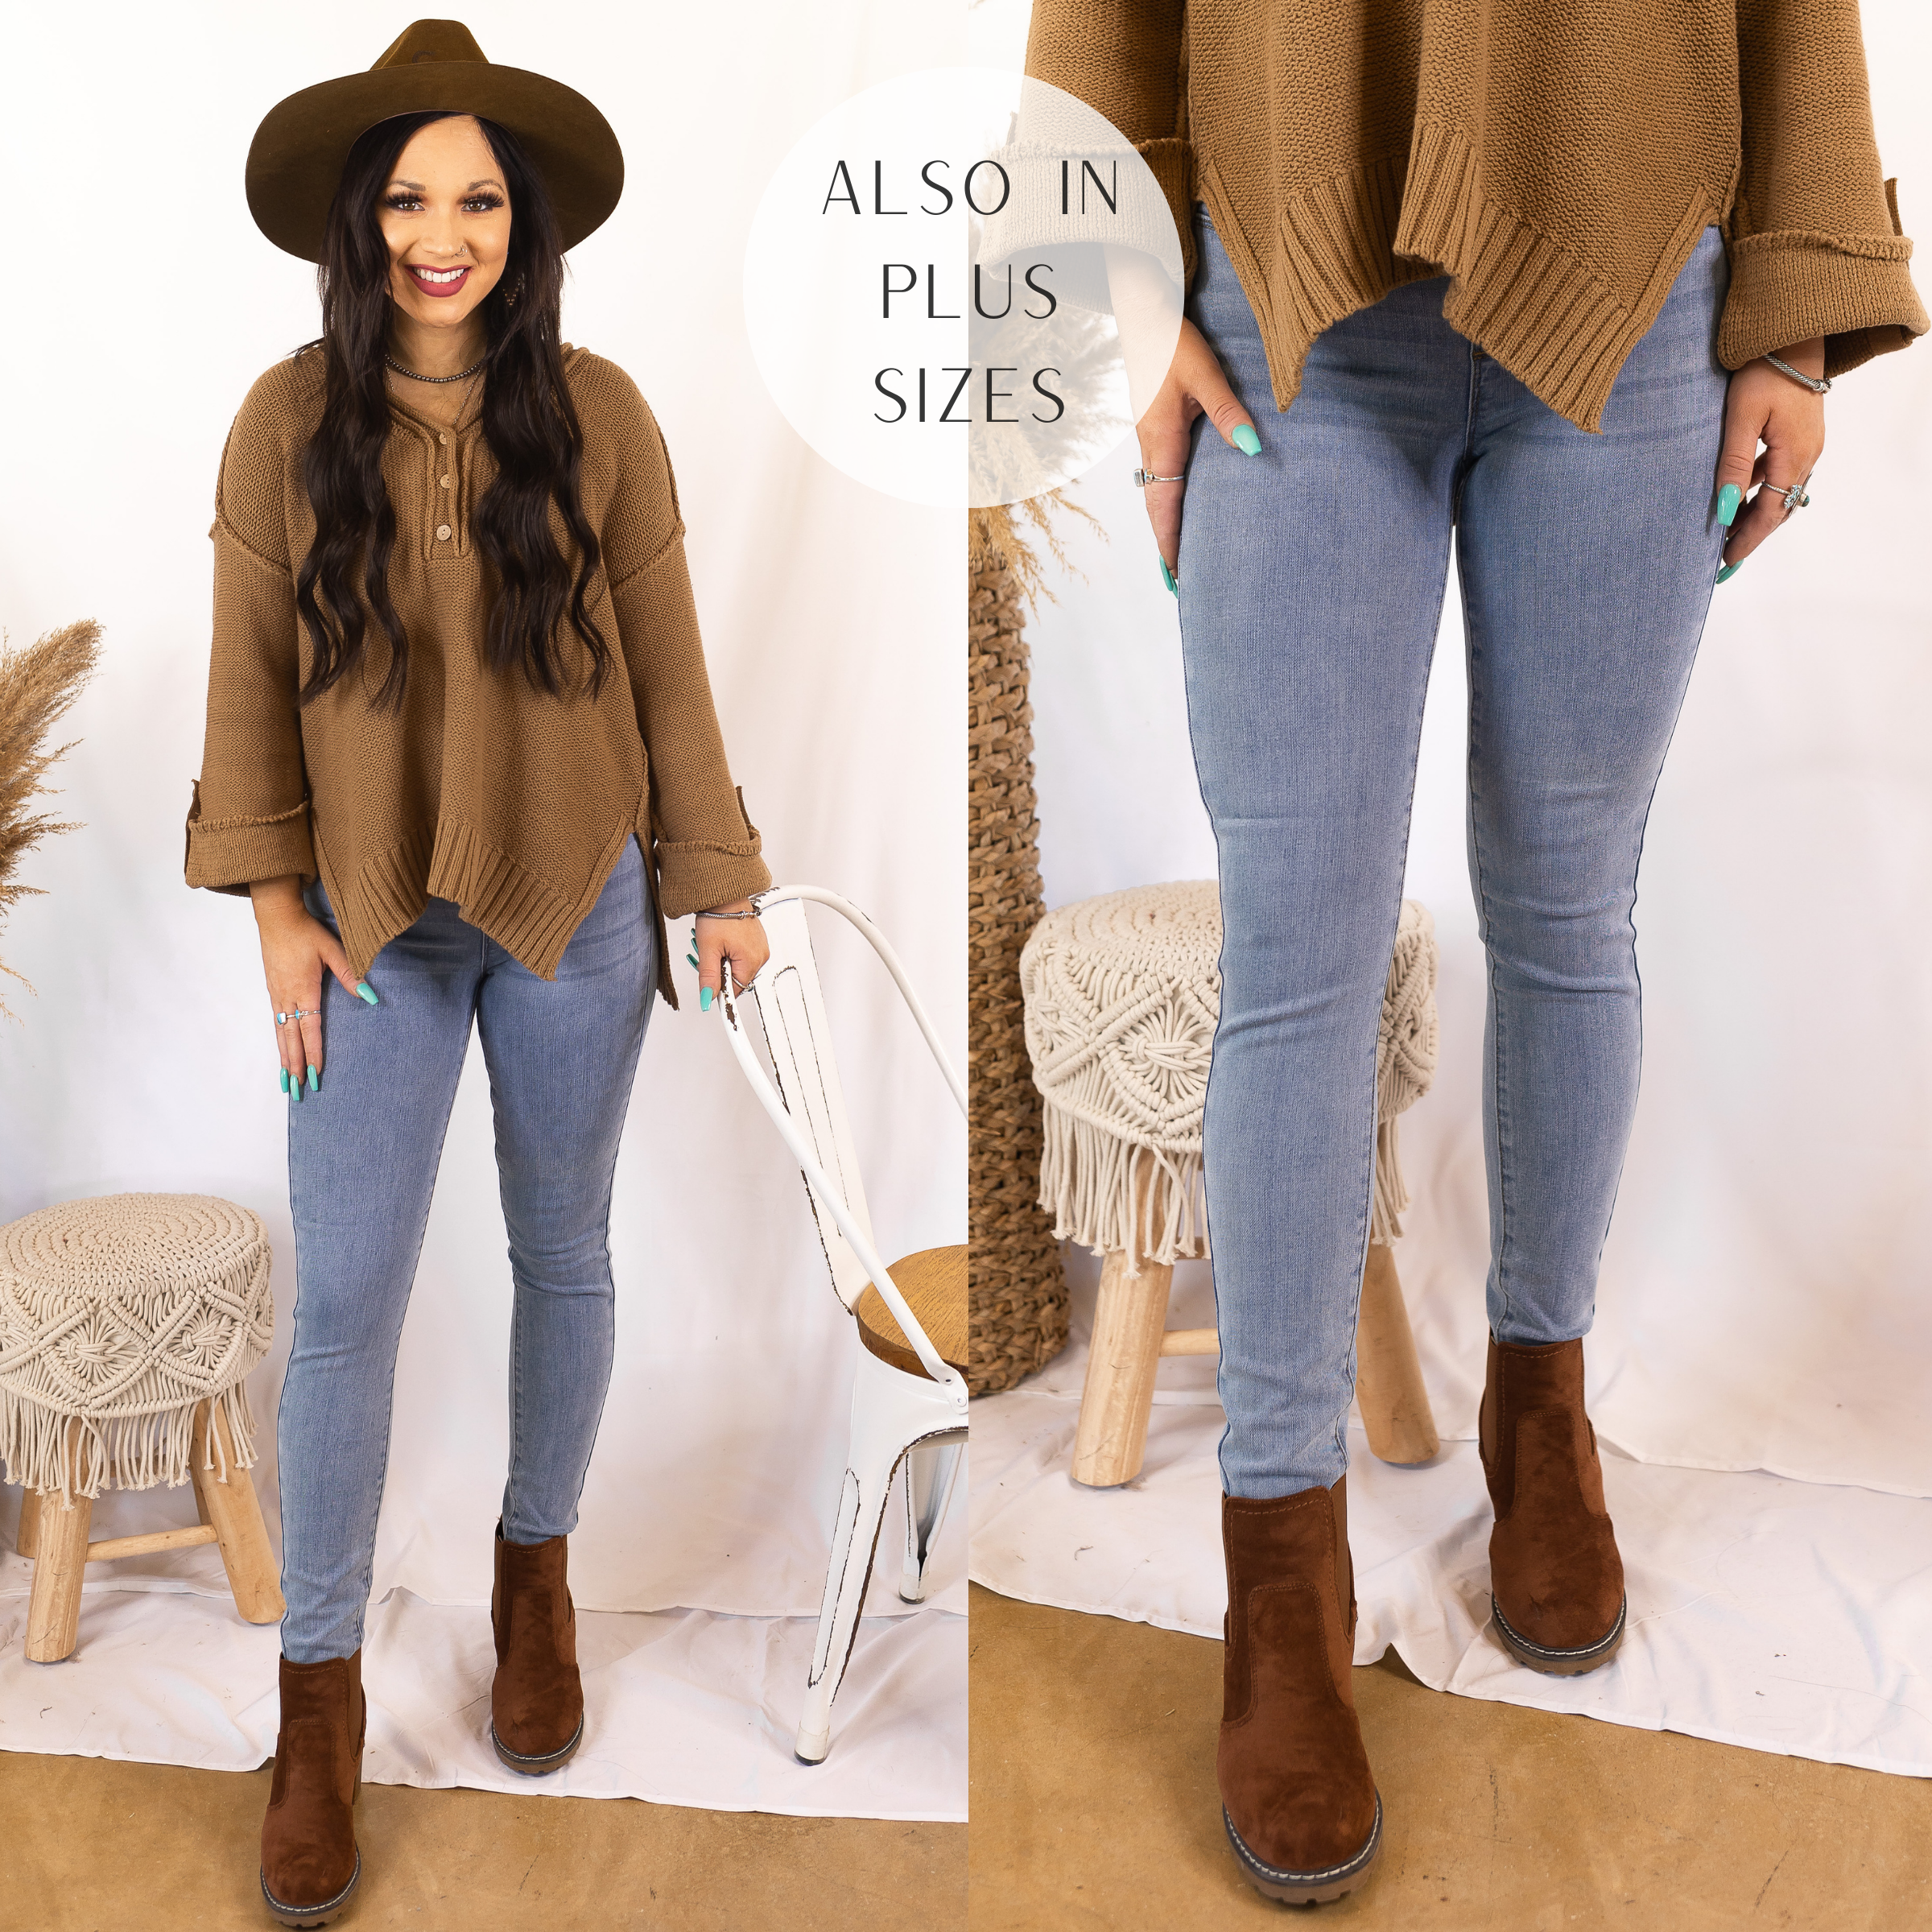 Model is wearing light wash elastic waist jeggings. Model has these skinny jeans paired with a tan sweater, brown booties, and a brown hat.